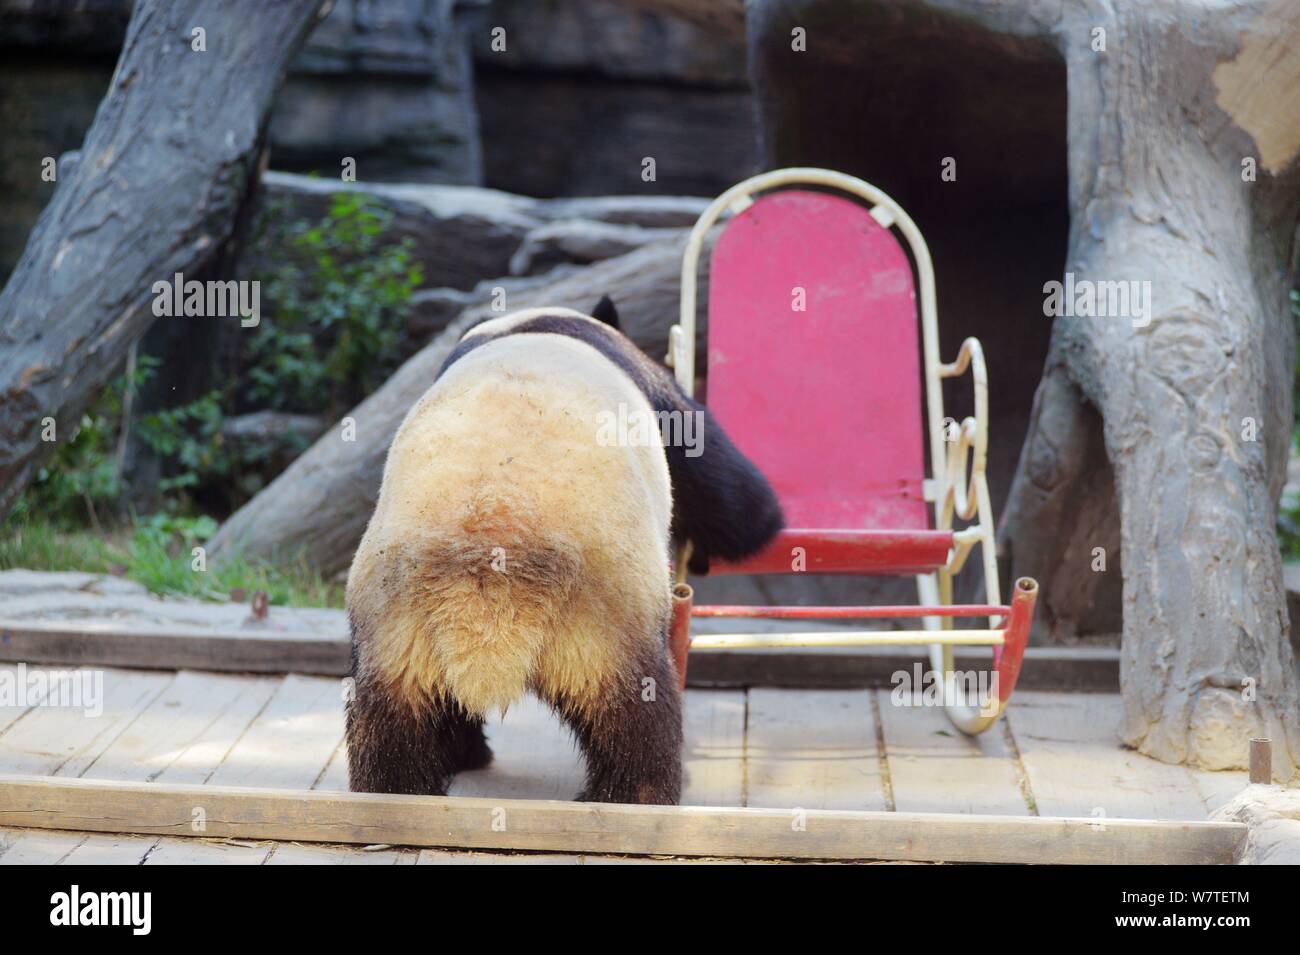 A giant panda prepares to sit on a rocking chair at Beijing Zoo in Beijing, China, 17 May 2017. Stock Photo